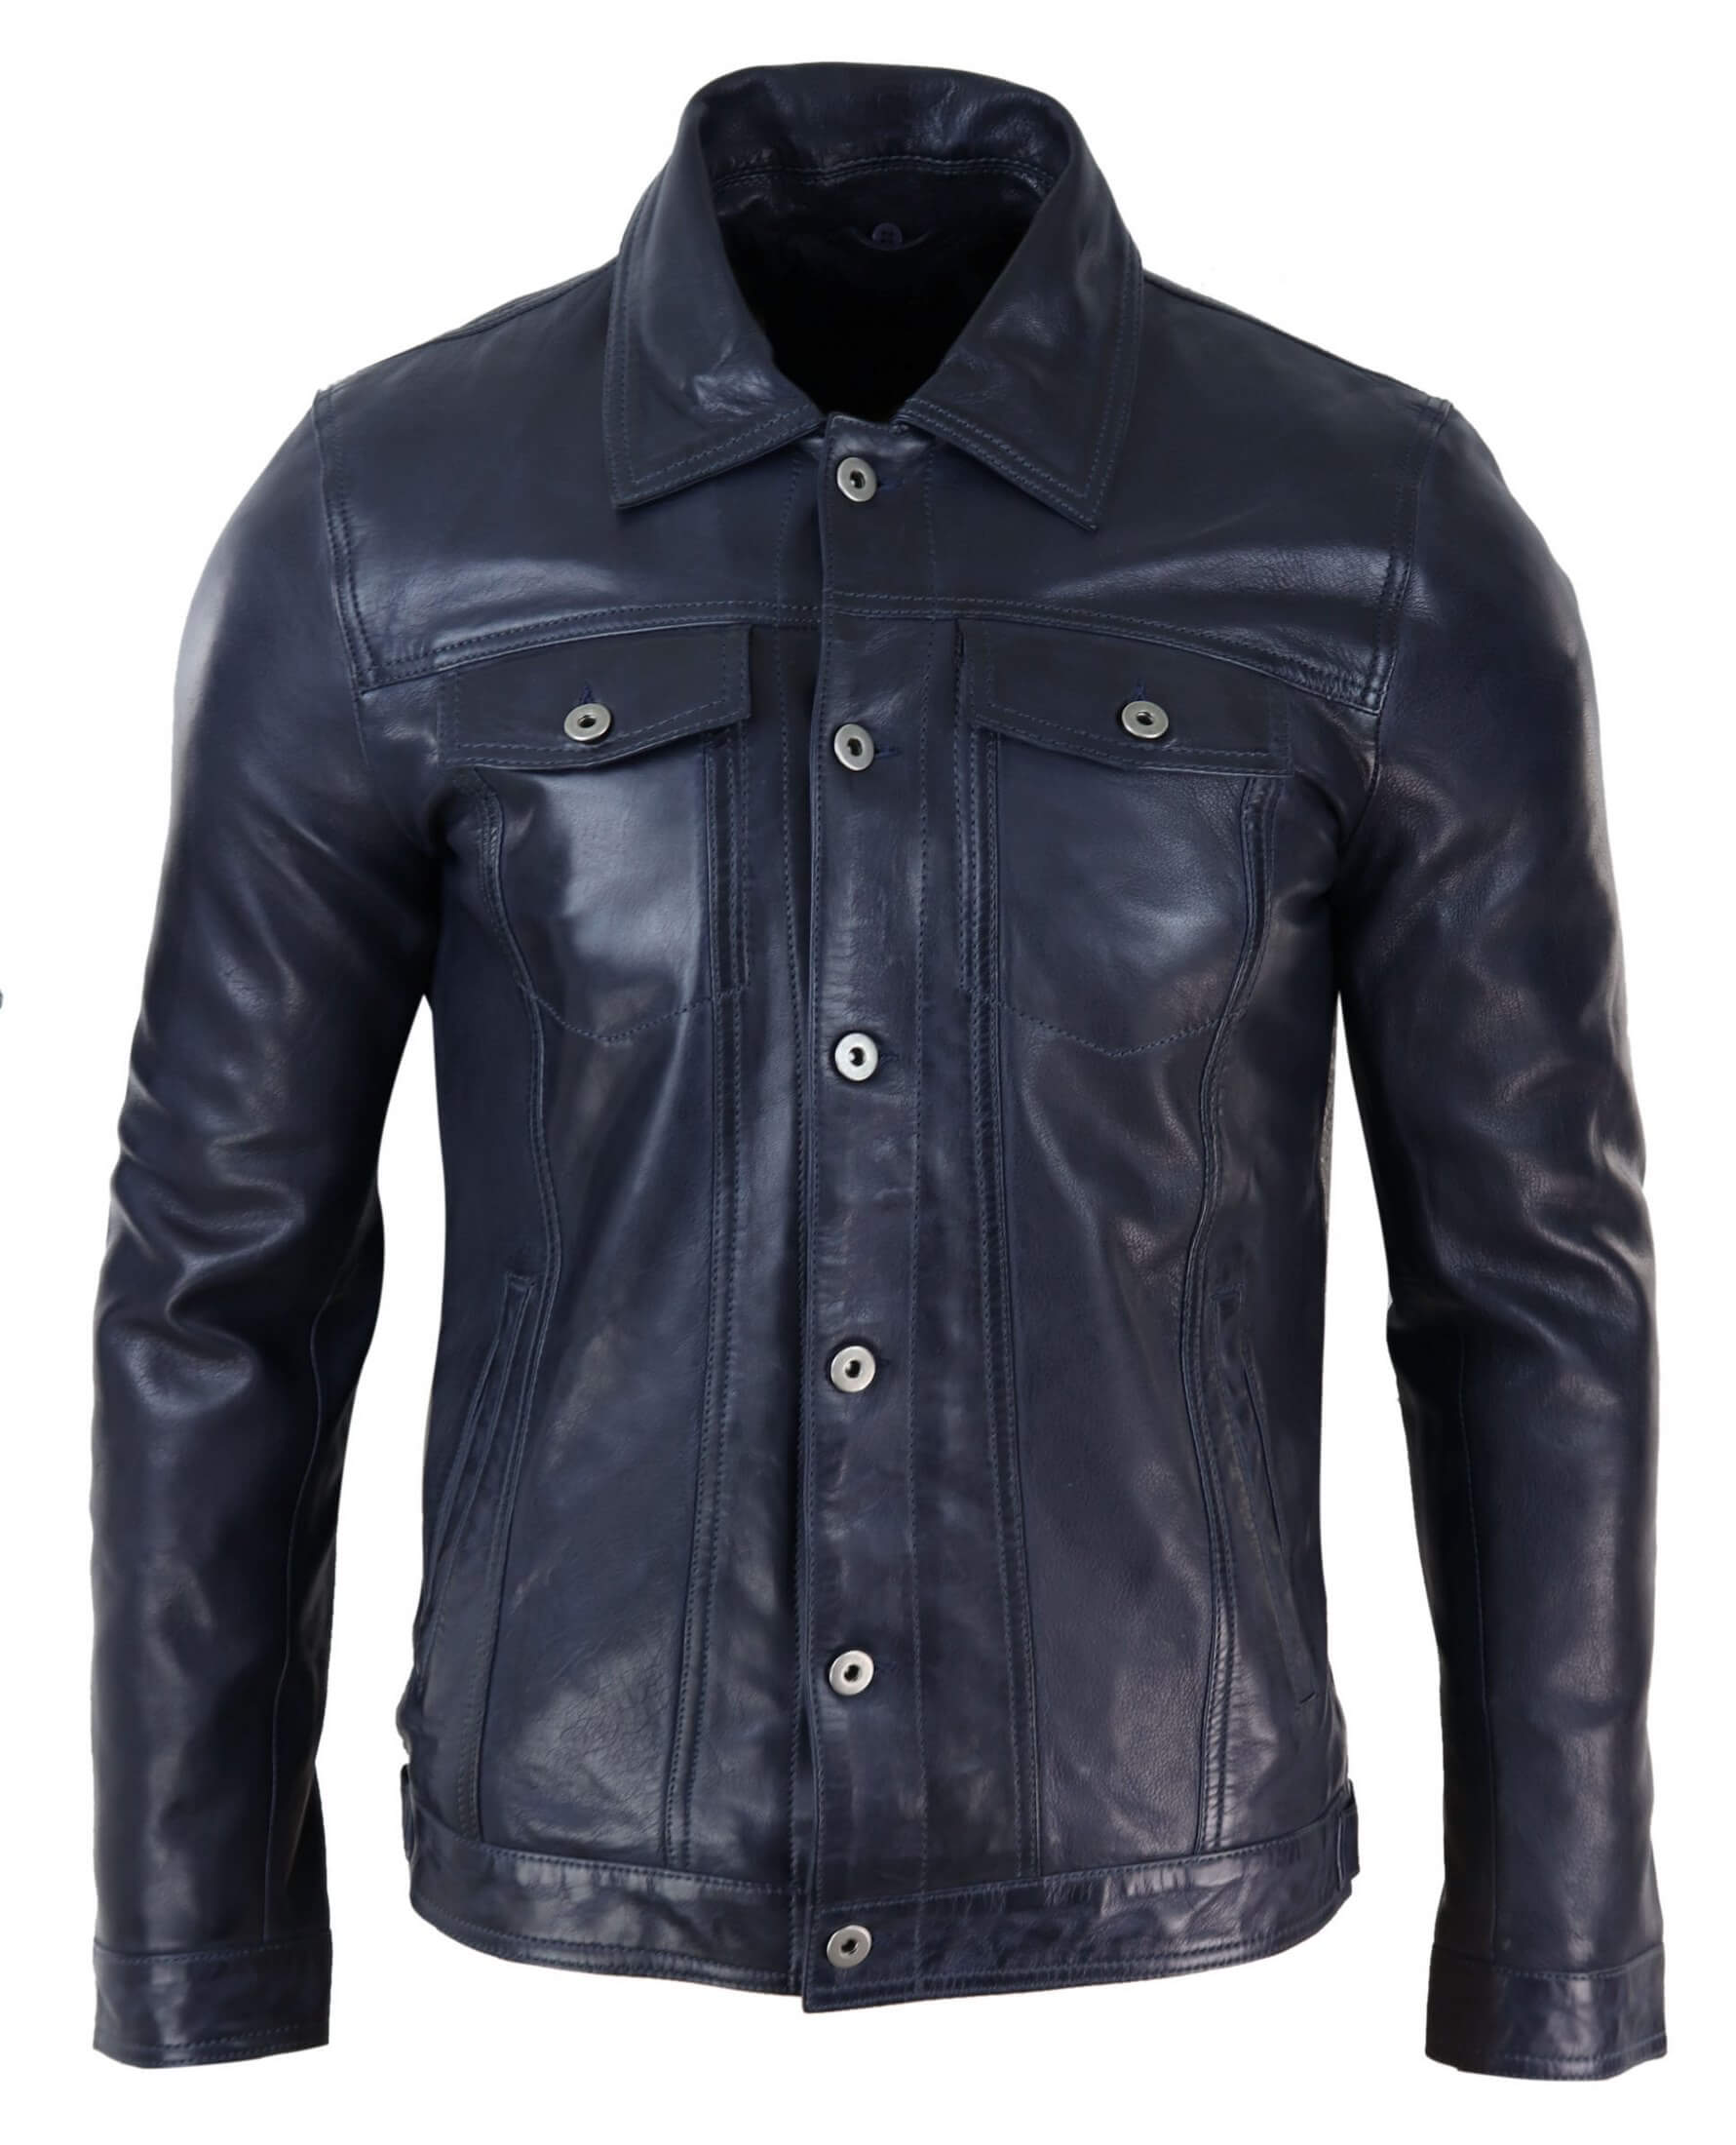 Mens Real Leather Jeans Jacket Fur Collar Retro Vintage Classic Navy ...